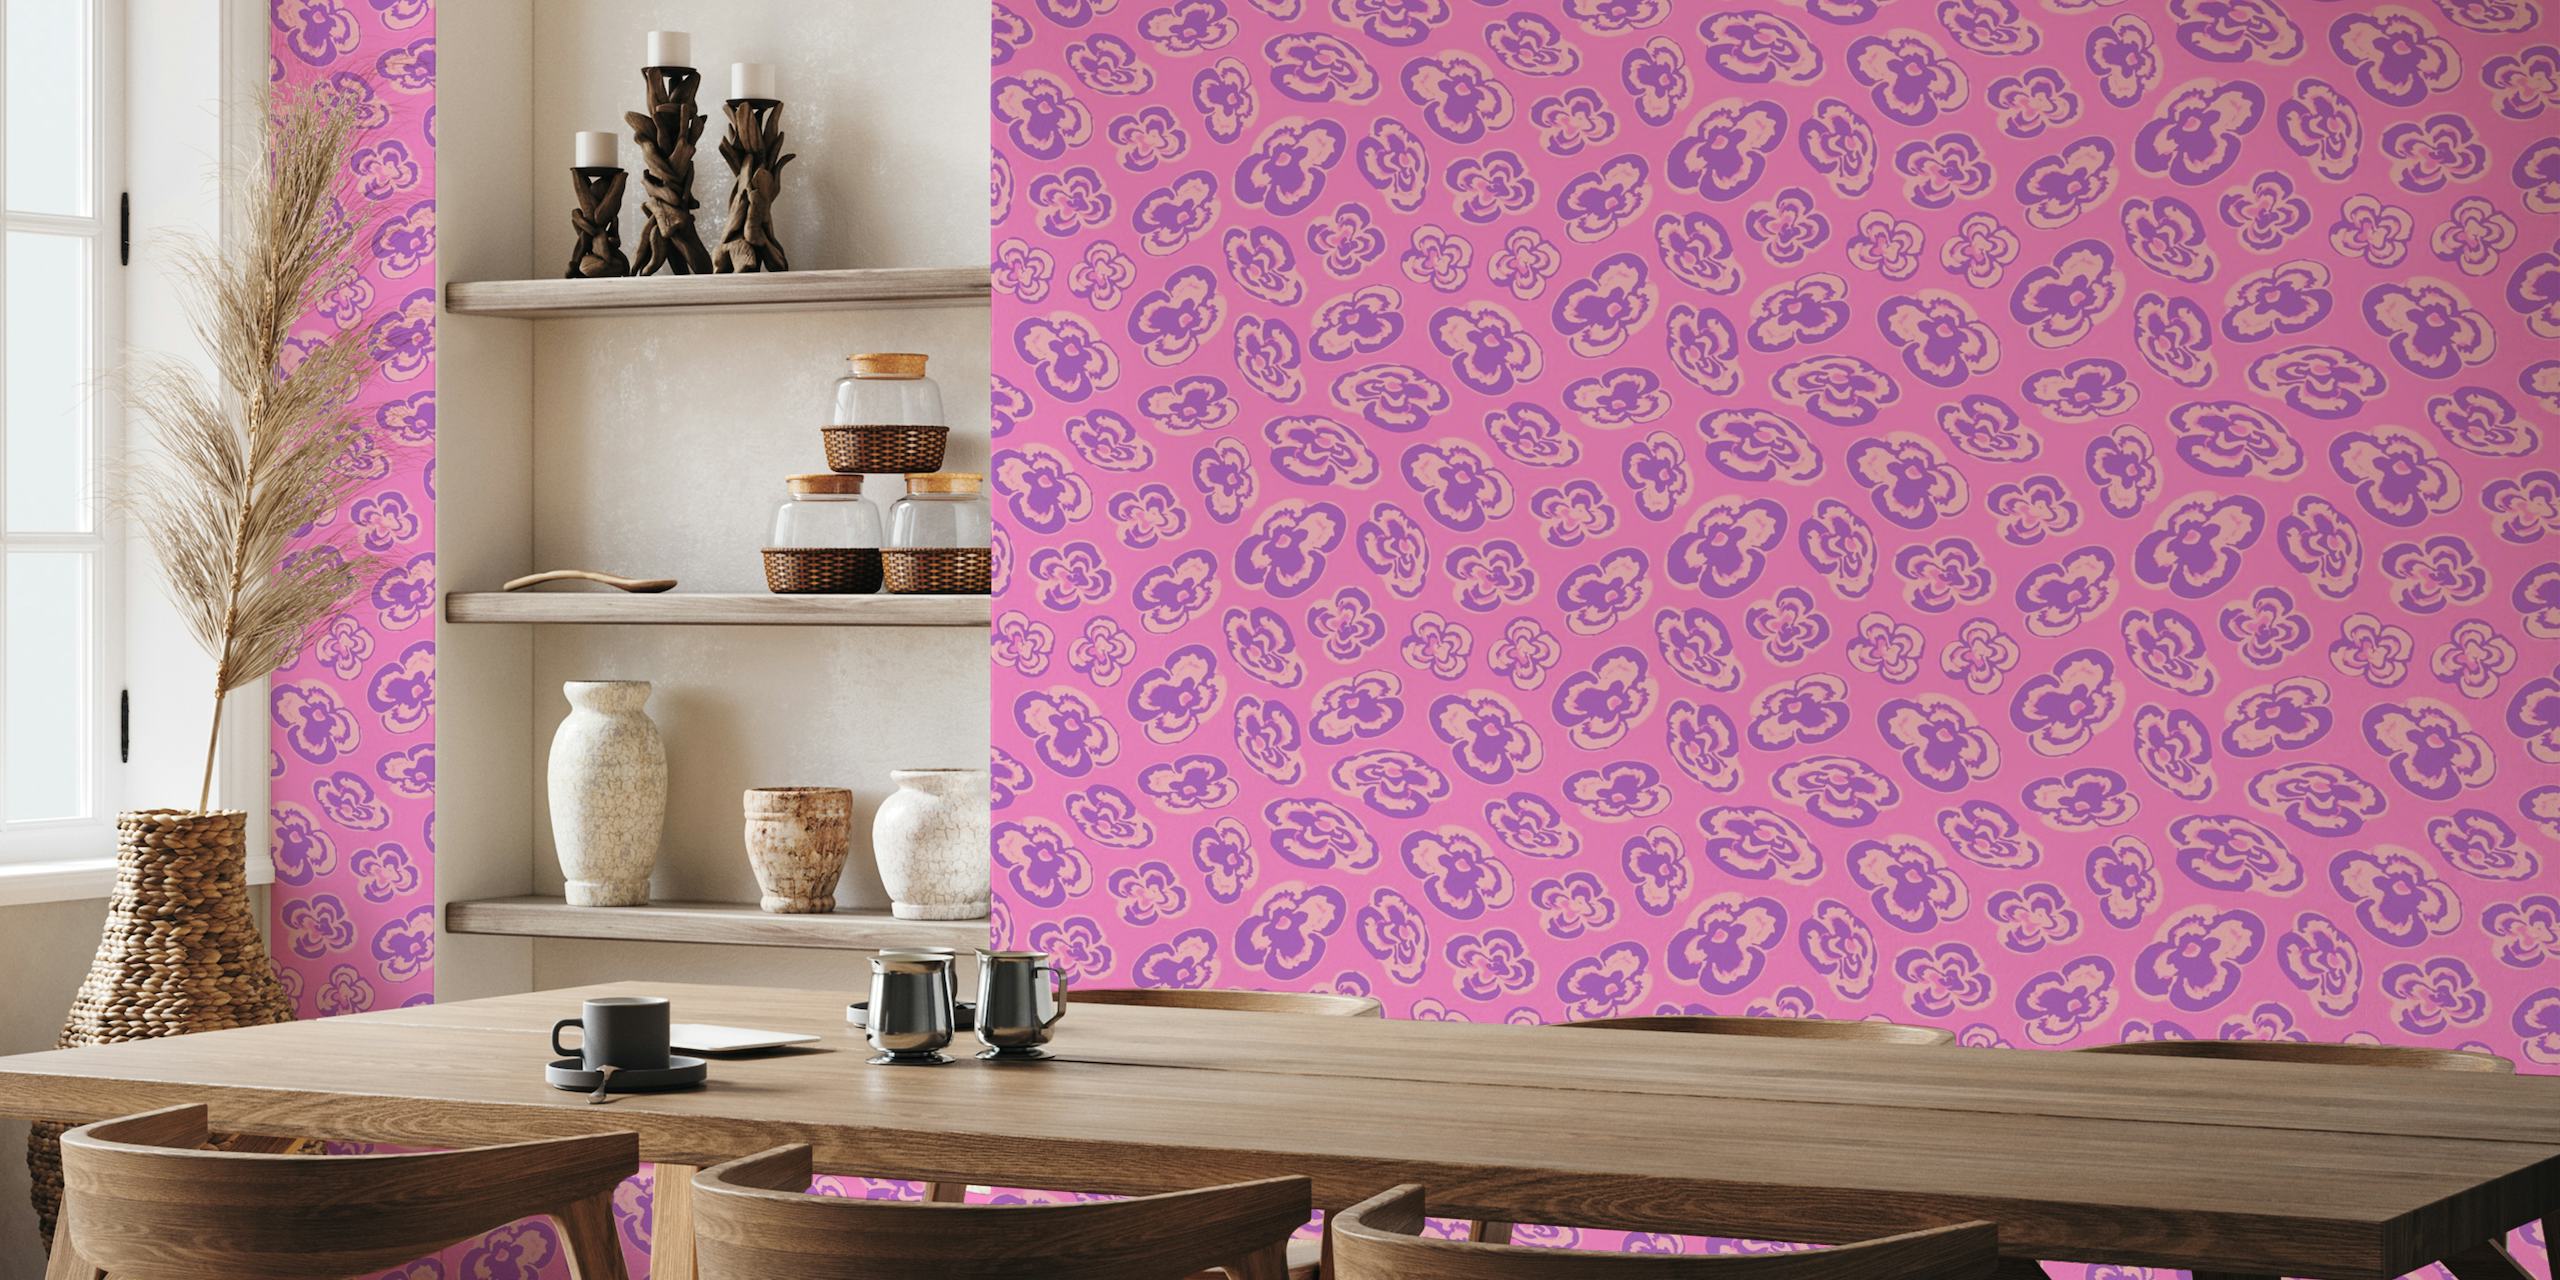 FLOATING LILIES Abstract Floral - Purple Pink carta da parati